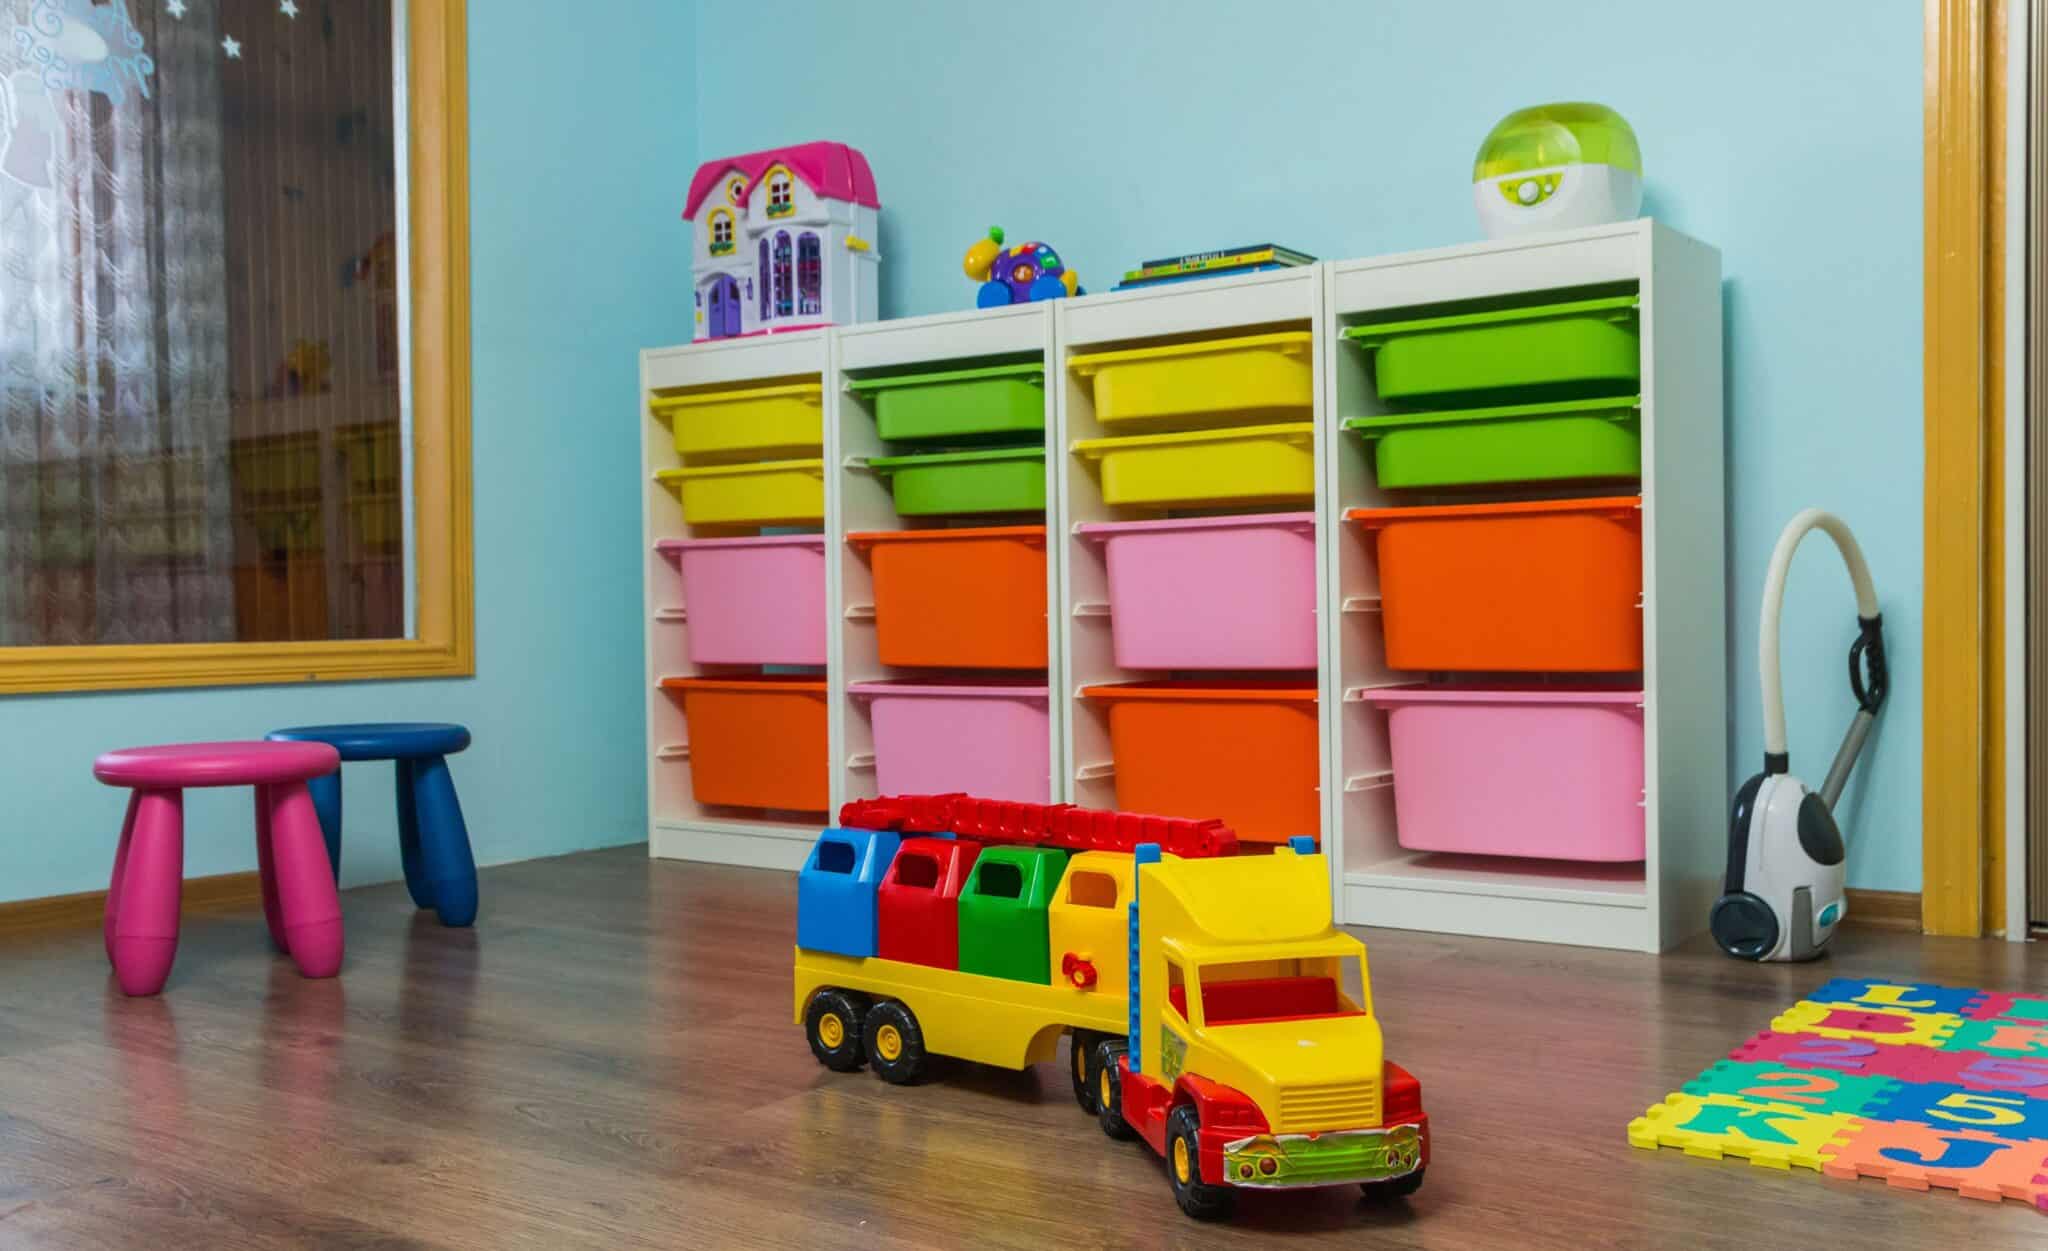 Small playroom with toys on wood floor sky blue walls and toy storage